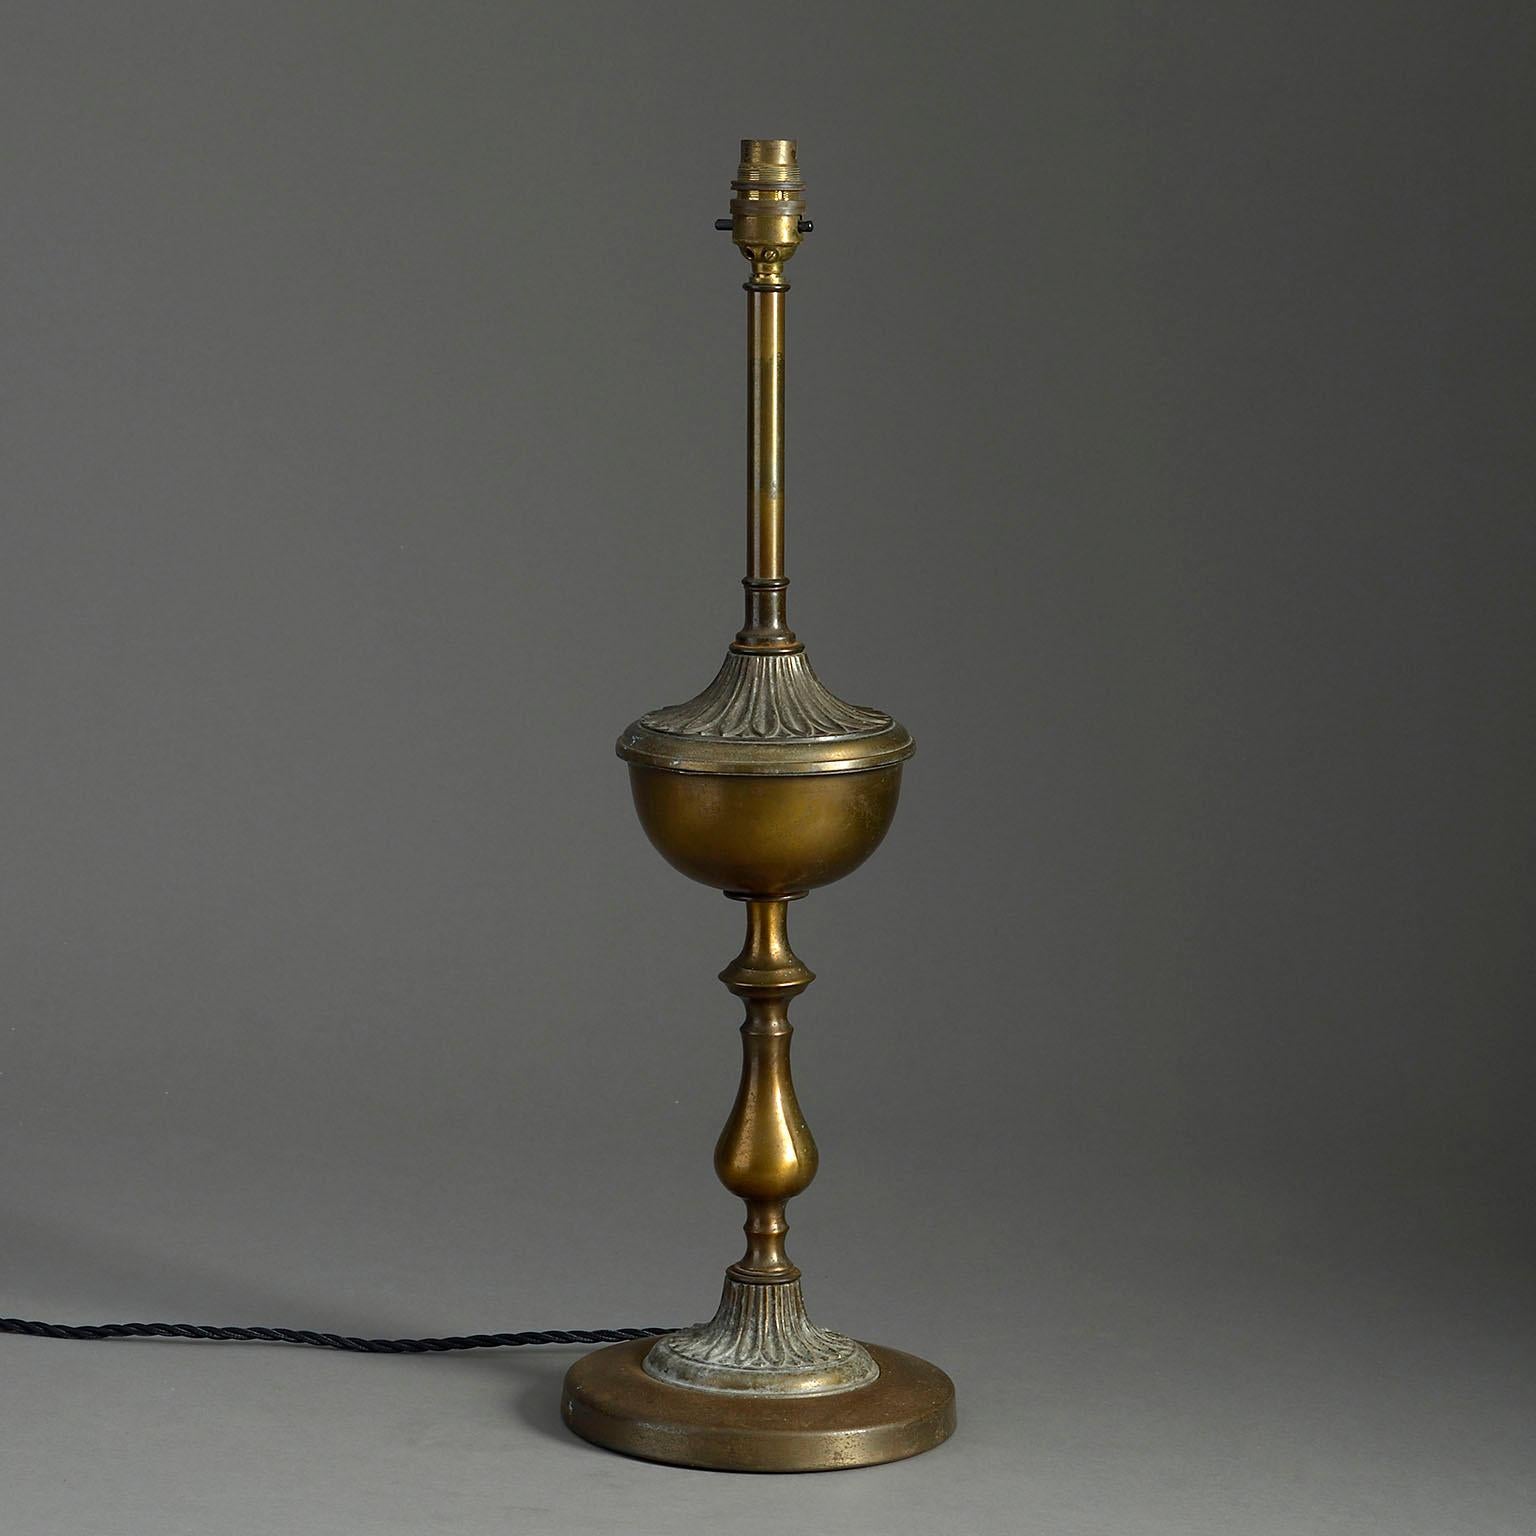 An early 20th century bronze patinated column lamp in the Neo-classical taste, the fluted vase upon a baluster stem and set upon a circular socle.

Height listed is to light bulb fitting.

Wired for UK safety standards. This lamp can be re-wired